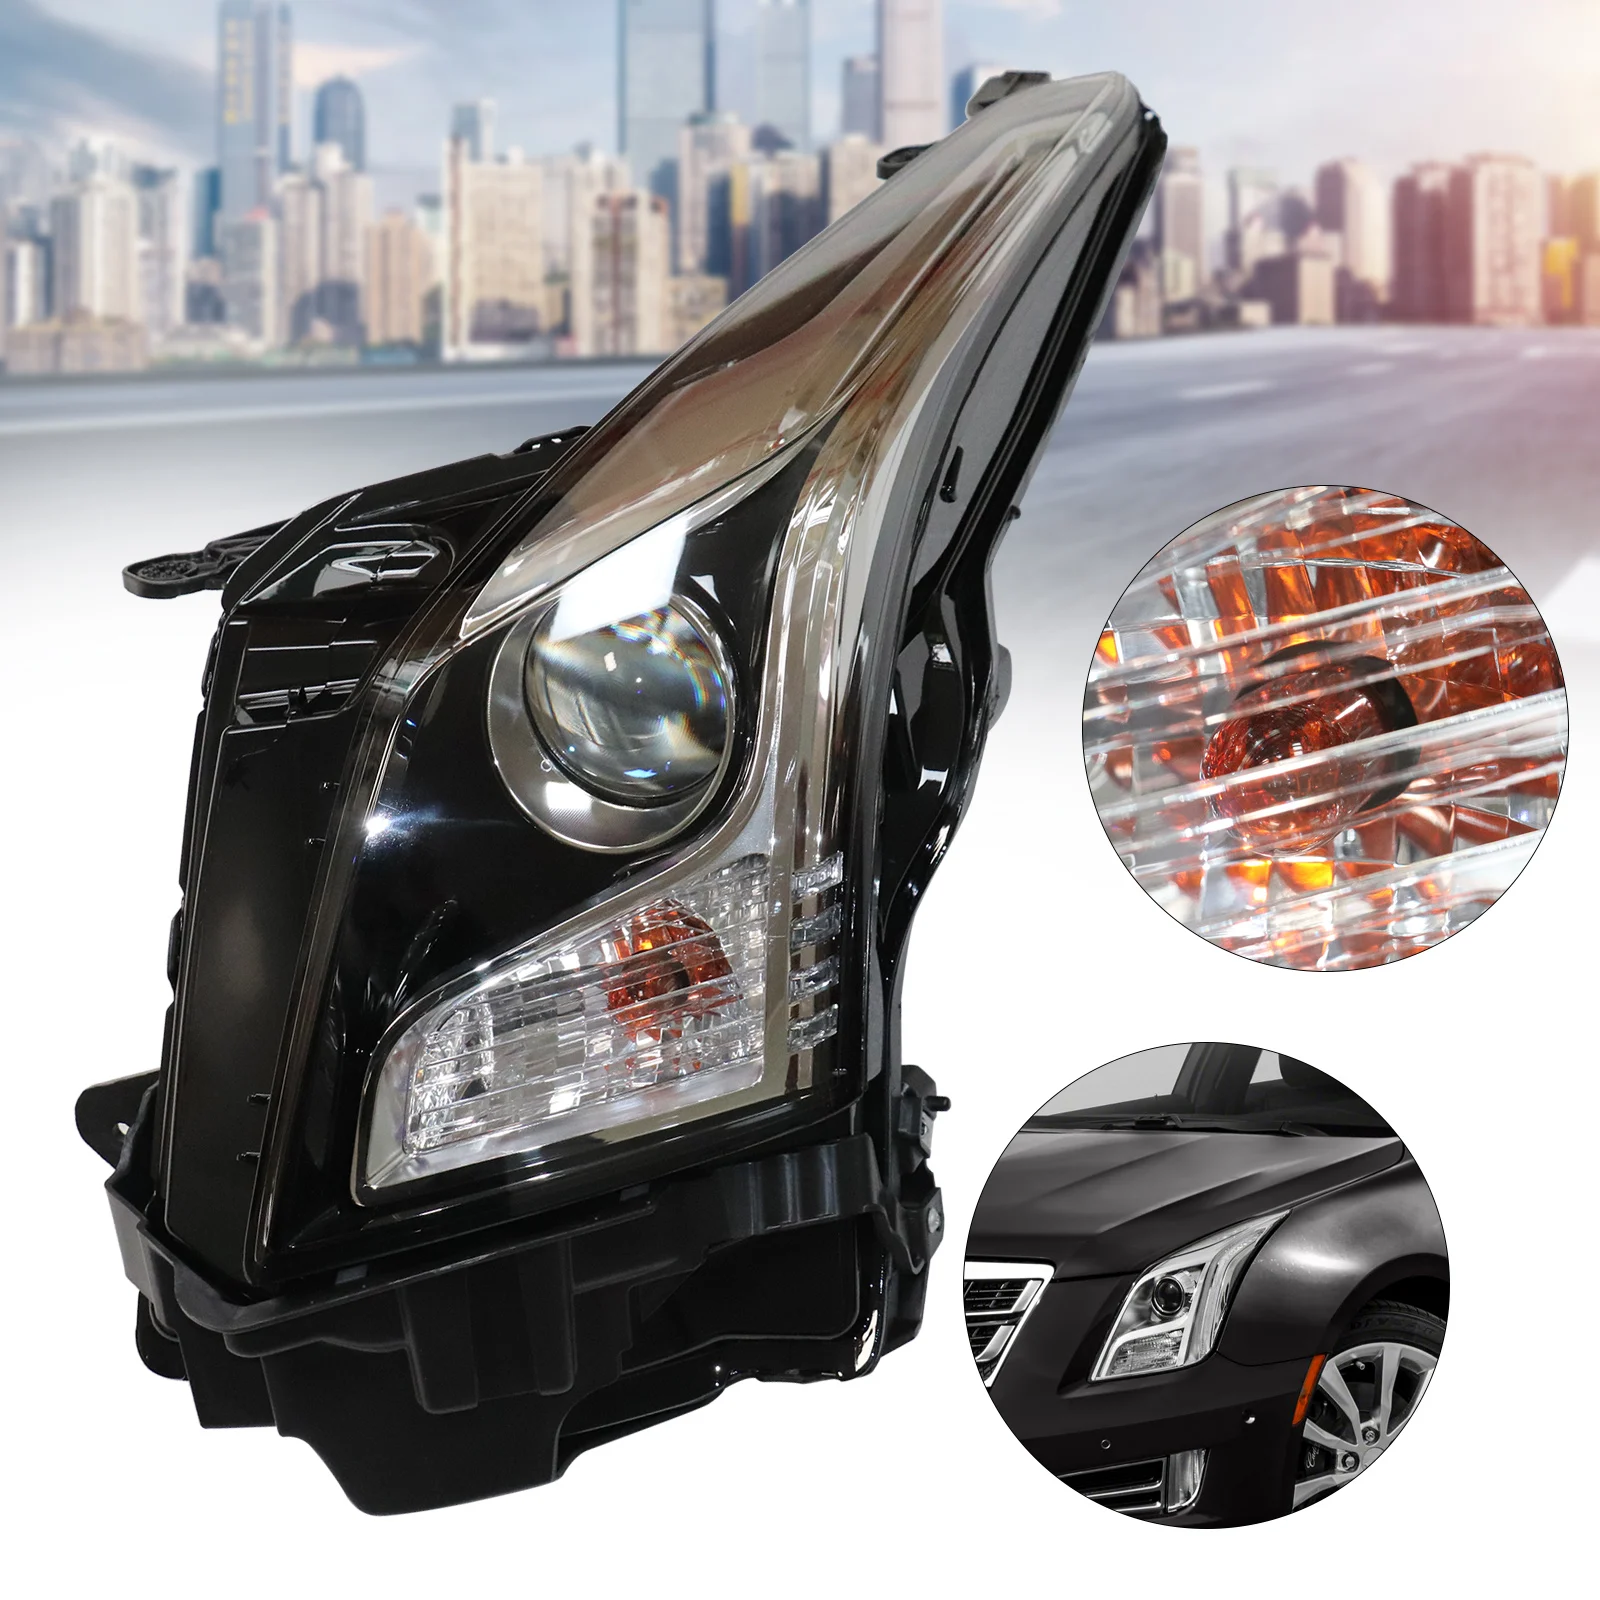 

Halogen Projector Headlight Front Left / Right Side Headlamp For 2013-2018 Cadillac ATS